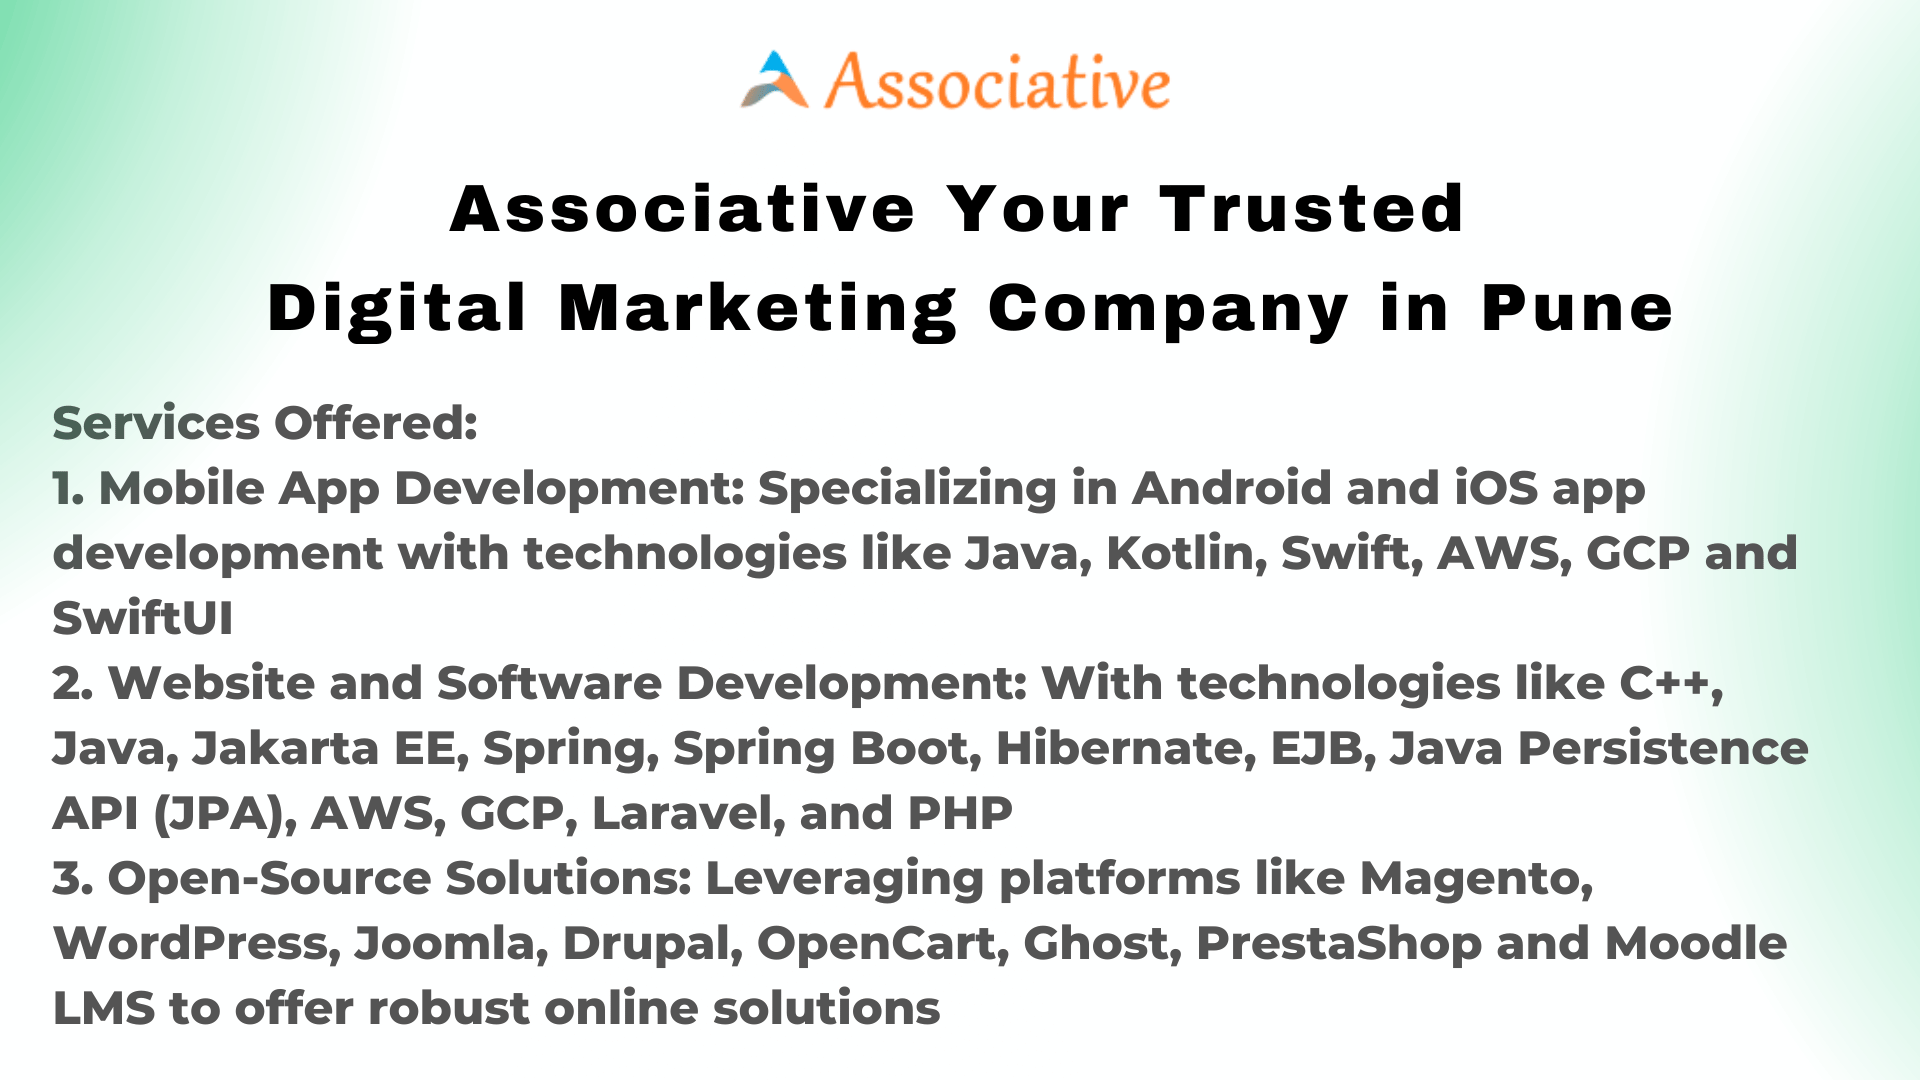 Associative Your Trusted Digital Marketing Company in Pune